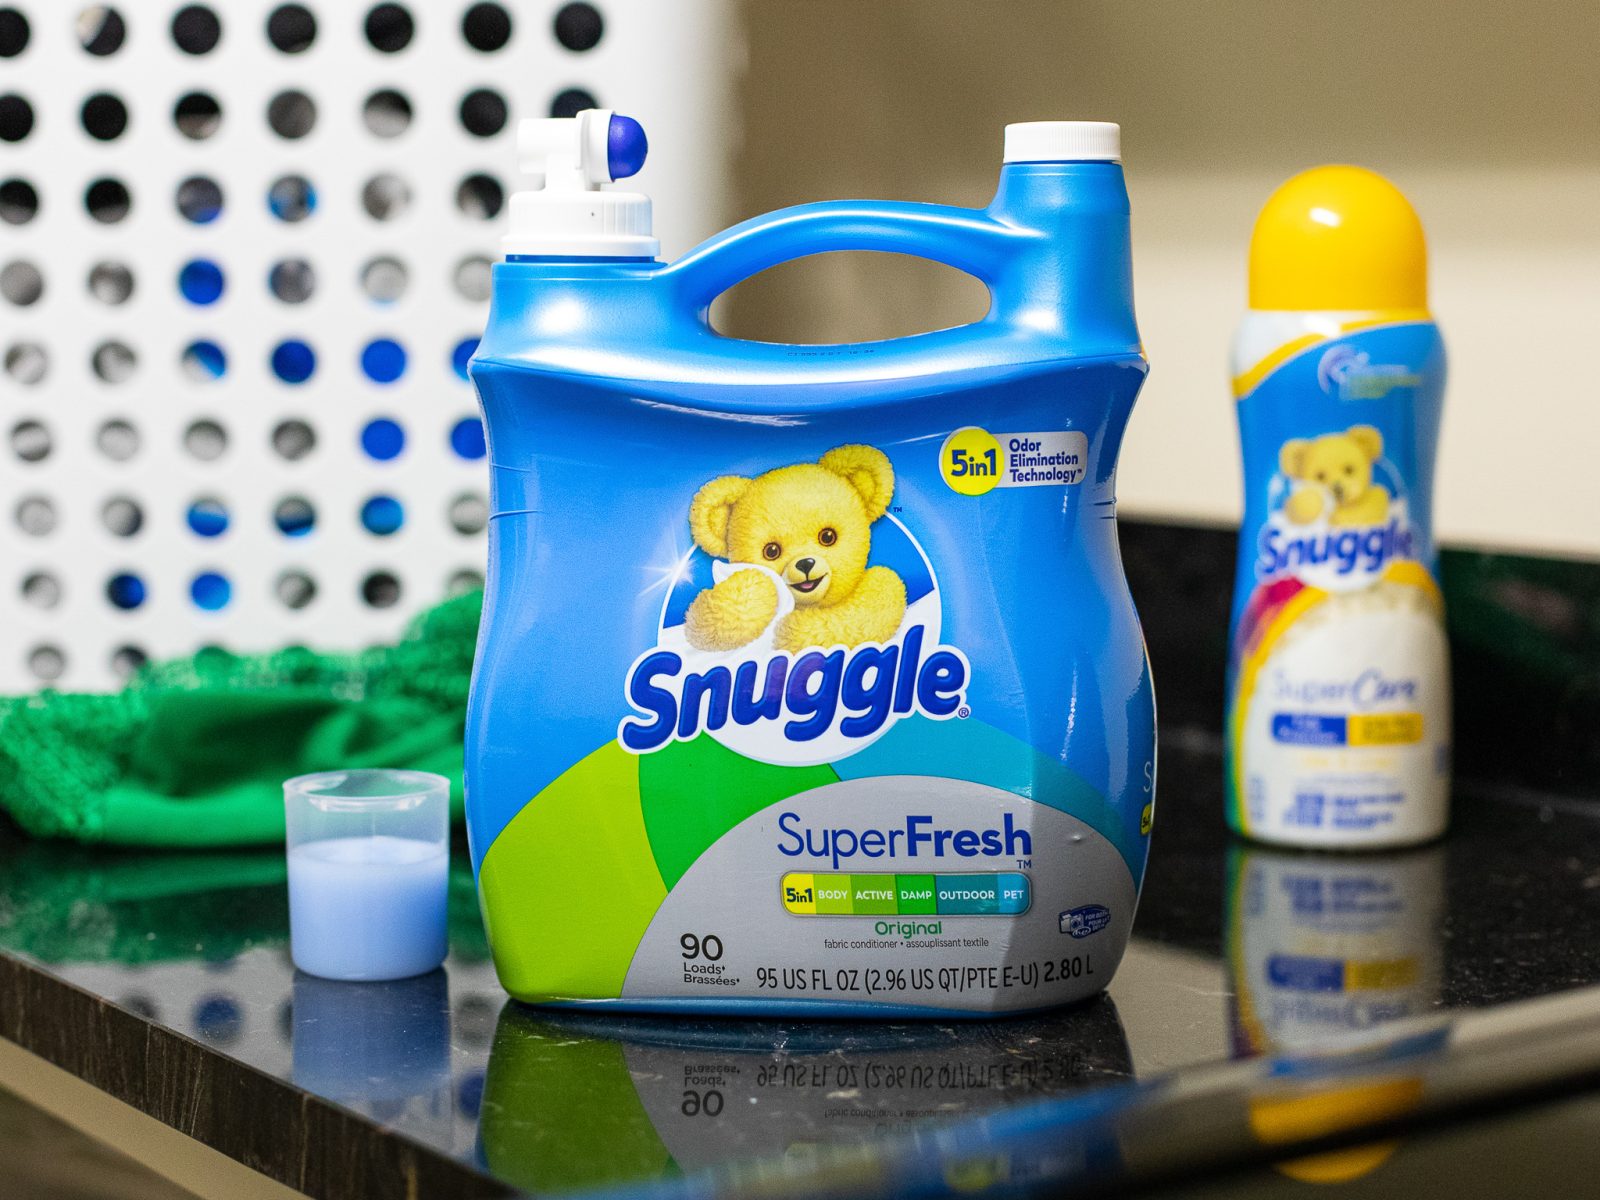 Big Bottles Of Snuggle Fabric Softener As Low As $5.99 At Kroger